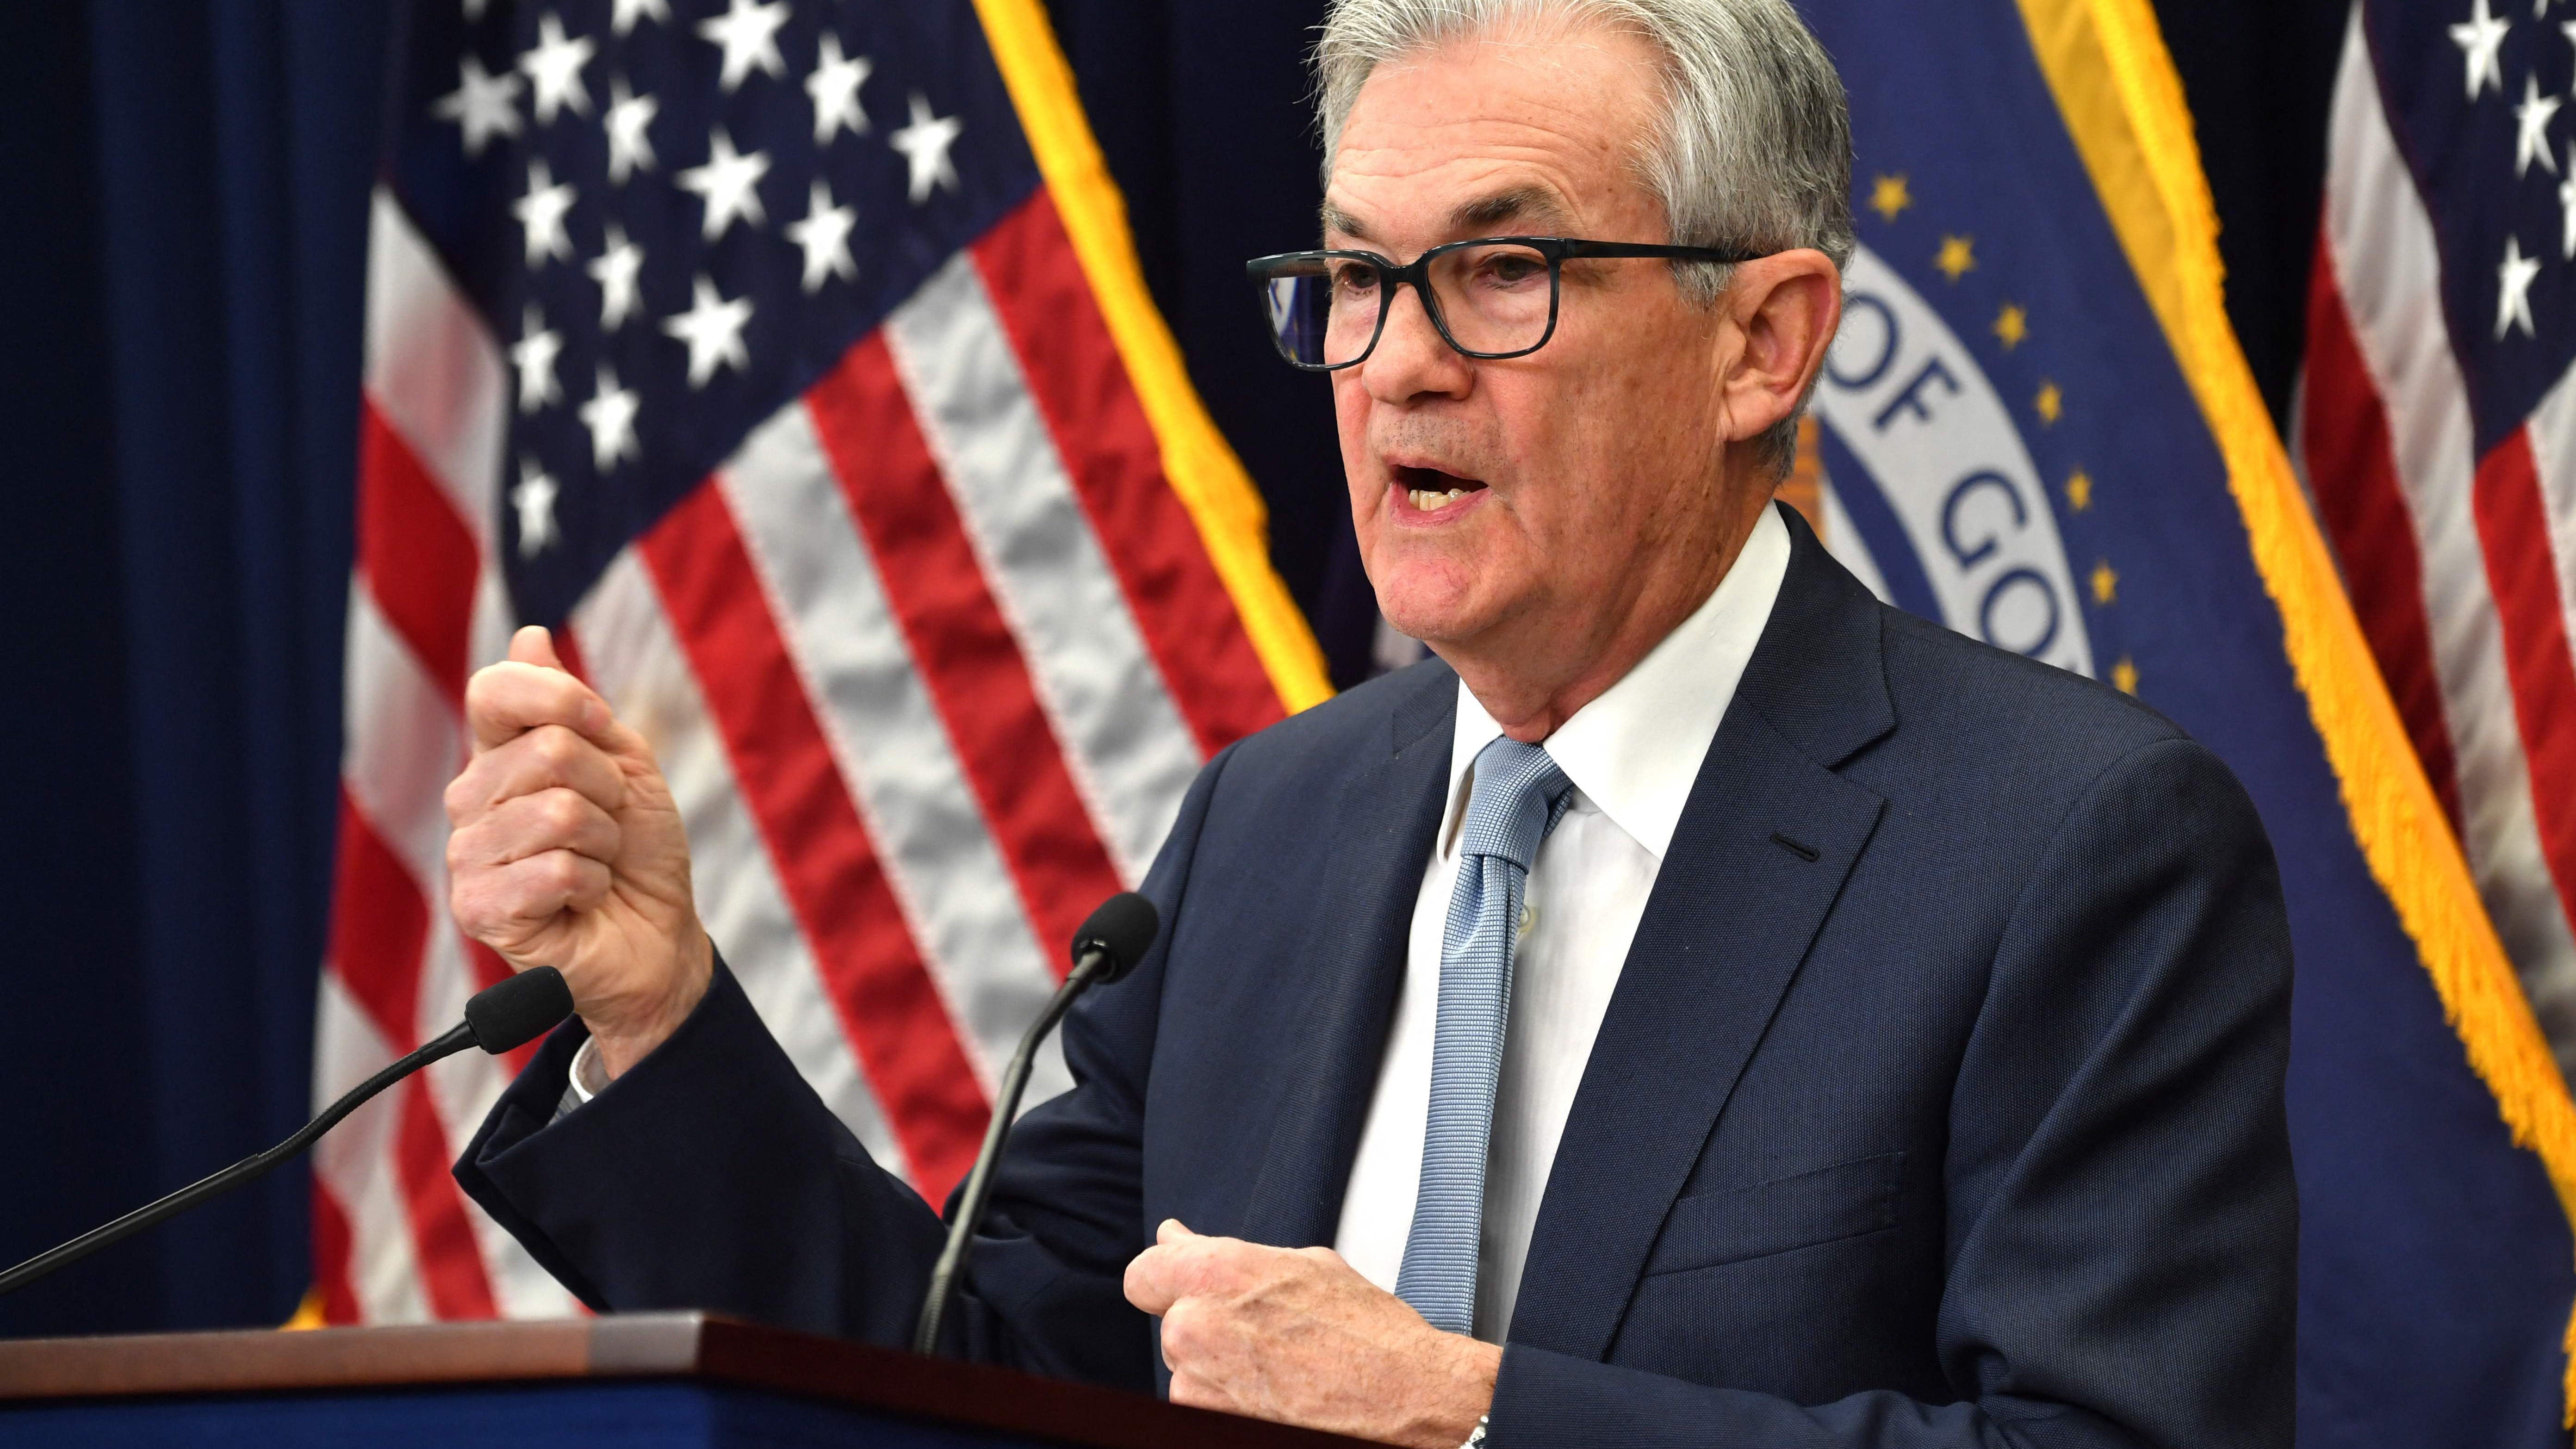 Federal Reserve Board Chairman Jerome Powell speaks at a news conference after a Federal Open Market Committee meeting at the Federal Reserve Board Building in Washington, DC on December 14, 2022.